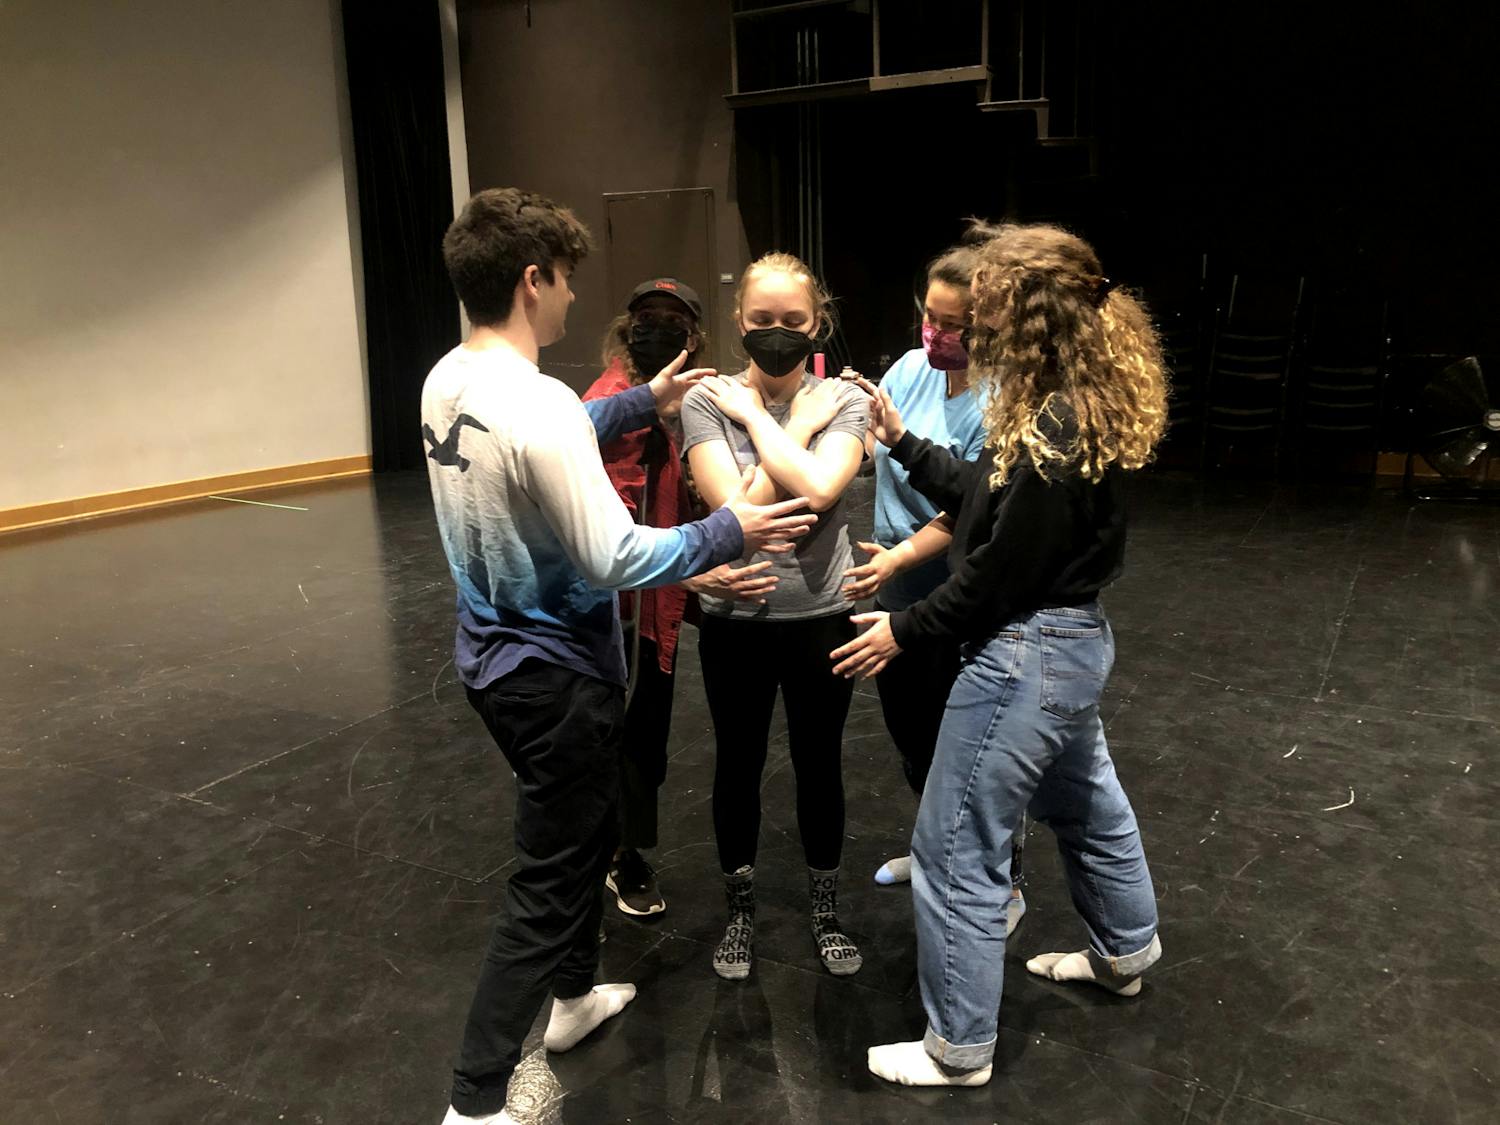 Theatre workshops - 1 of 3